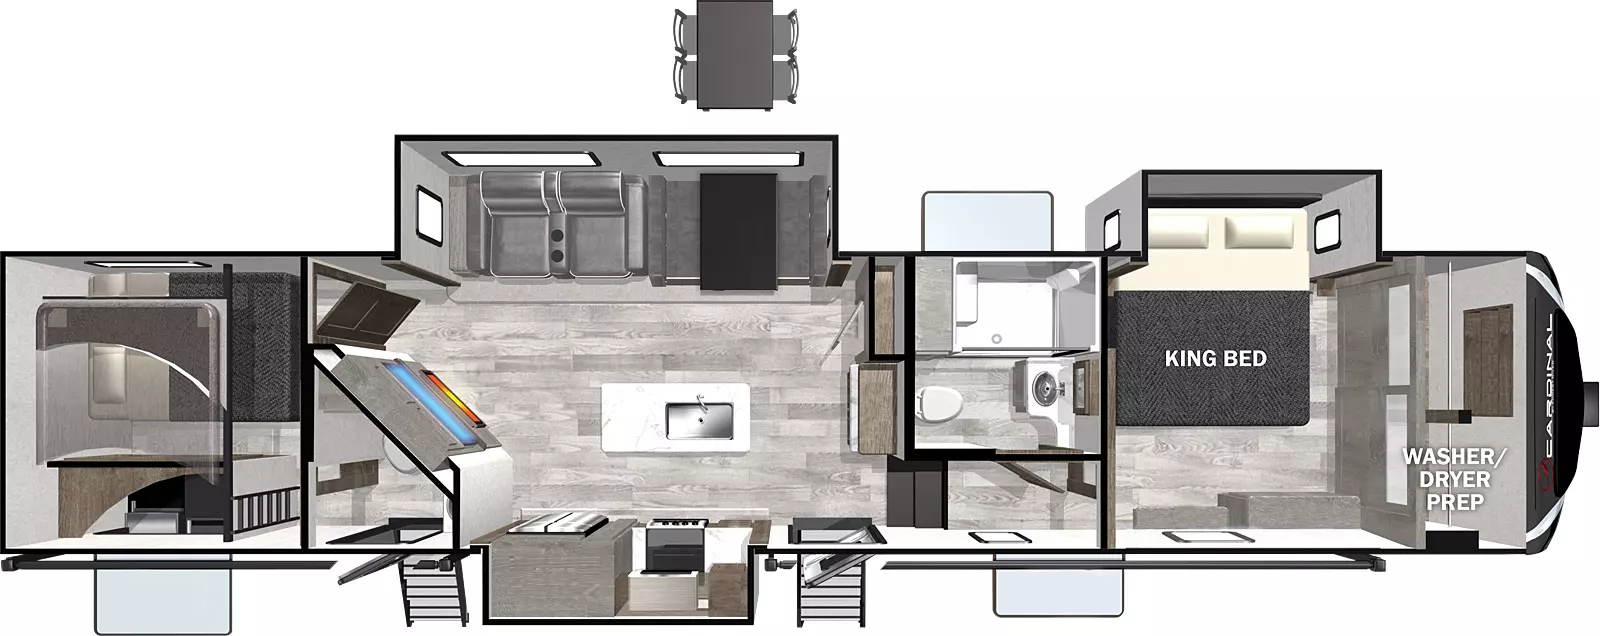 The 352BHLE has 3 slide outs and two entry doors. Interior layout from front to back: front bedroom with king bed slideout and washer/dryer prep; off-door side full bathroom; two steps down to kitchen/living room with opposing slideouts and main entry steps; rear bunk room and half bathroom with second entry.